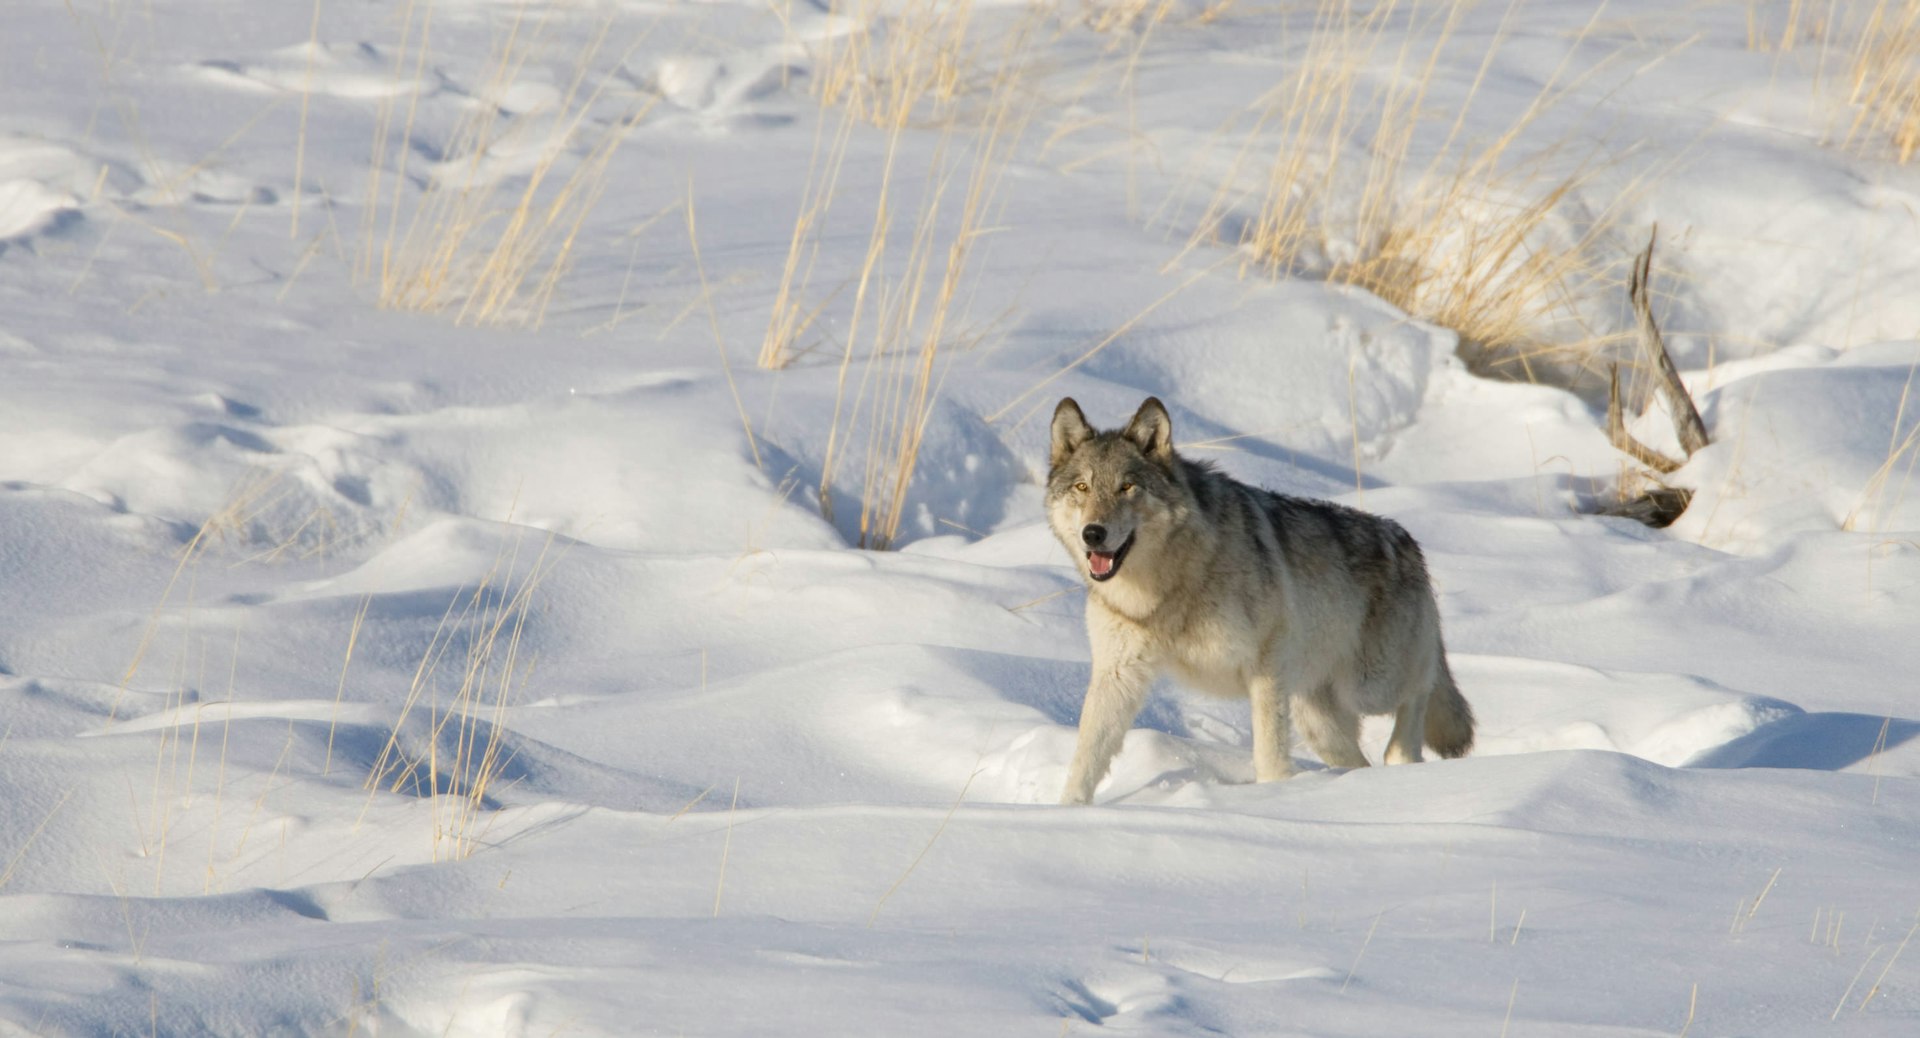 Wild gray wolf (Canis lupis) trotting through winter snow in Yellowstone National Park, Montana, USA